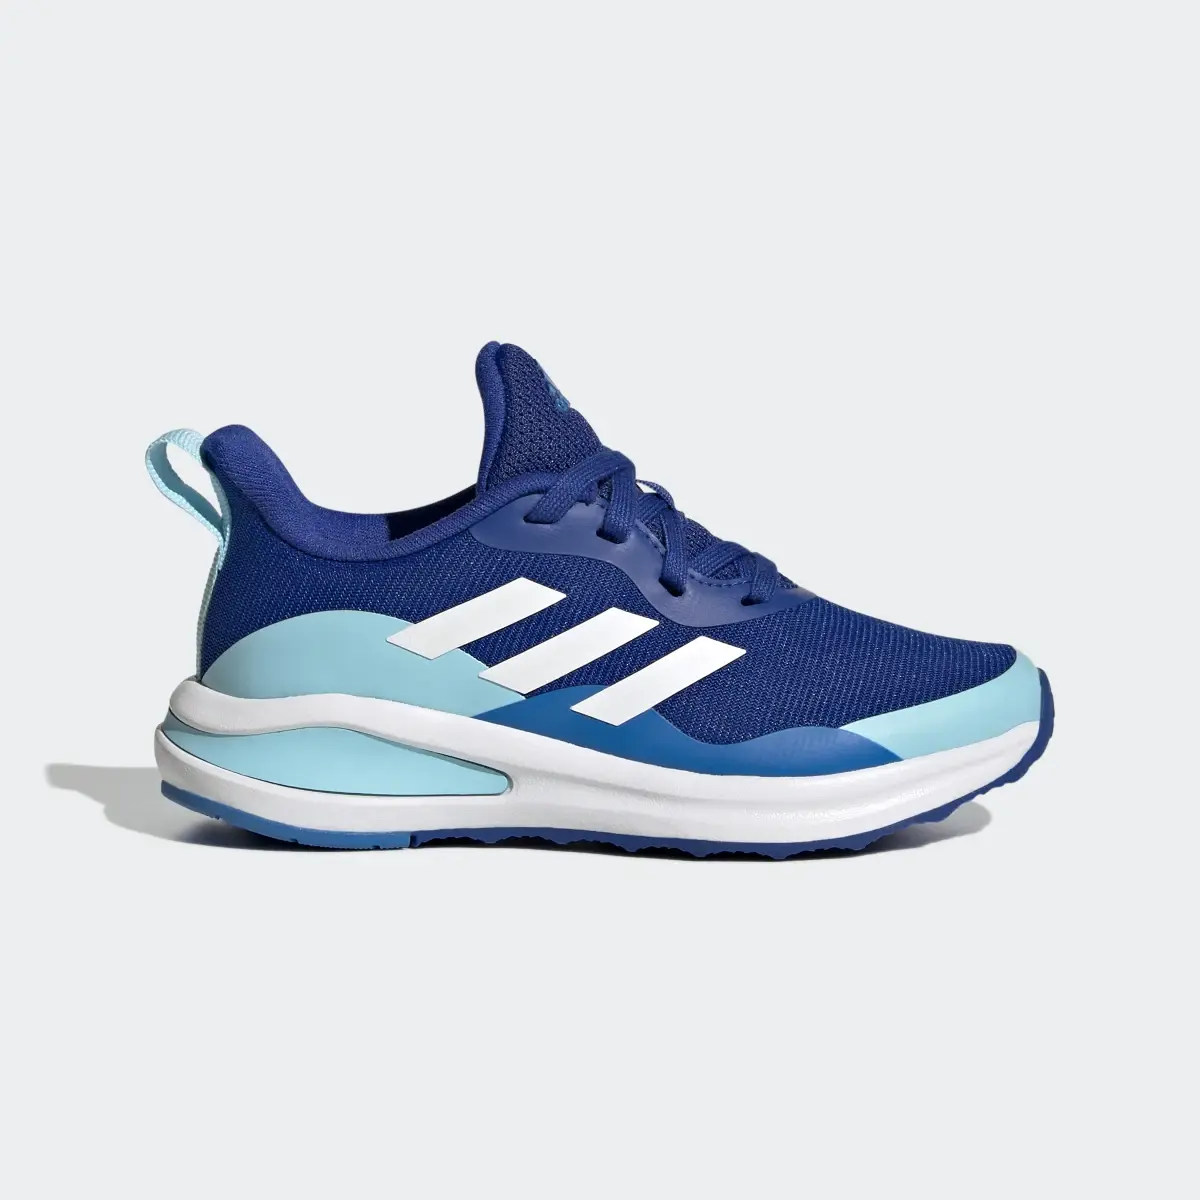 Adidas FortaRun Sport Running Lace Shoes. 2